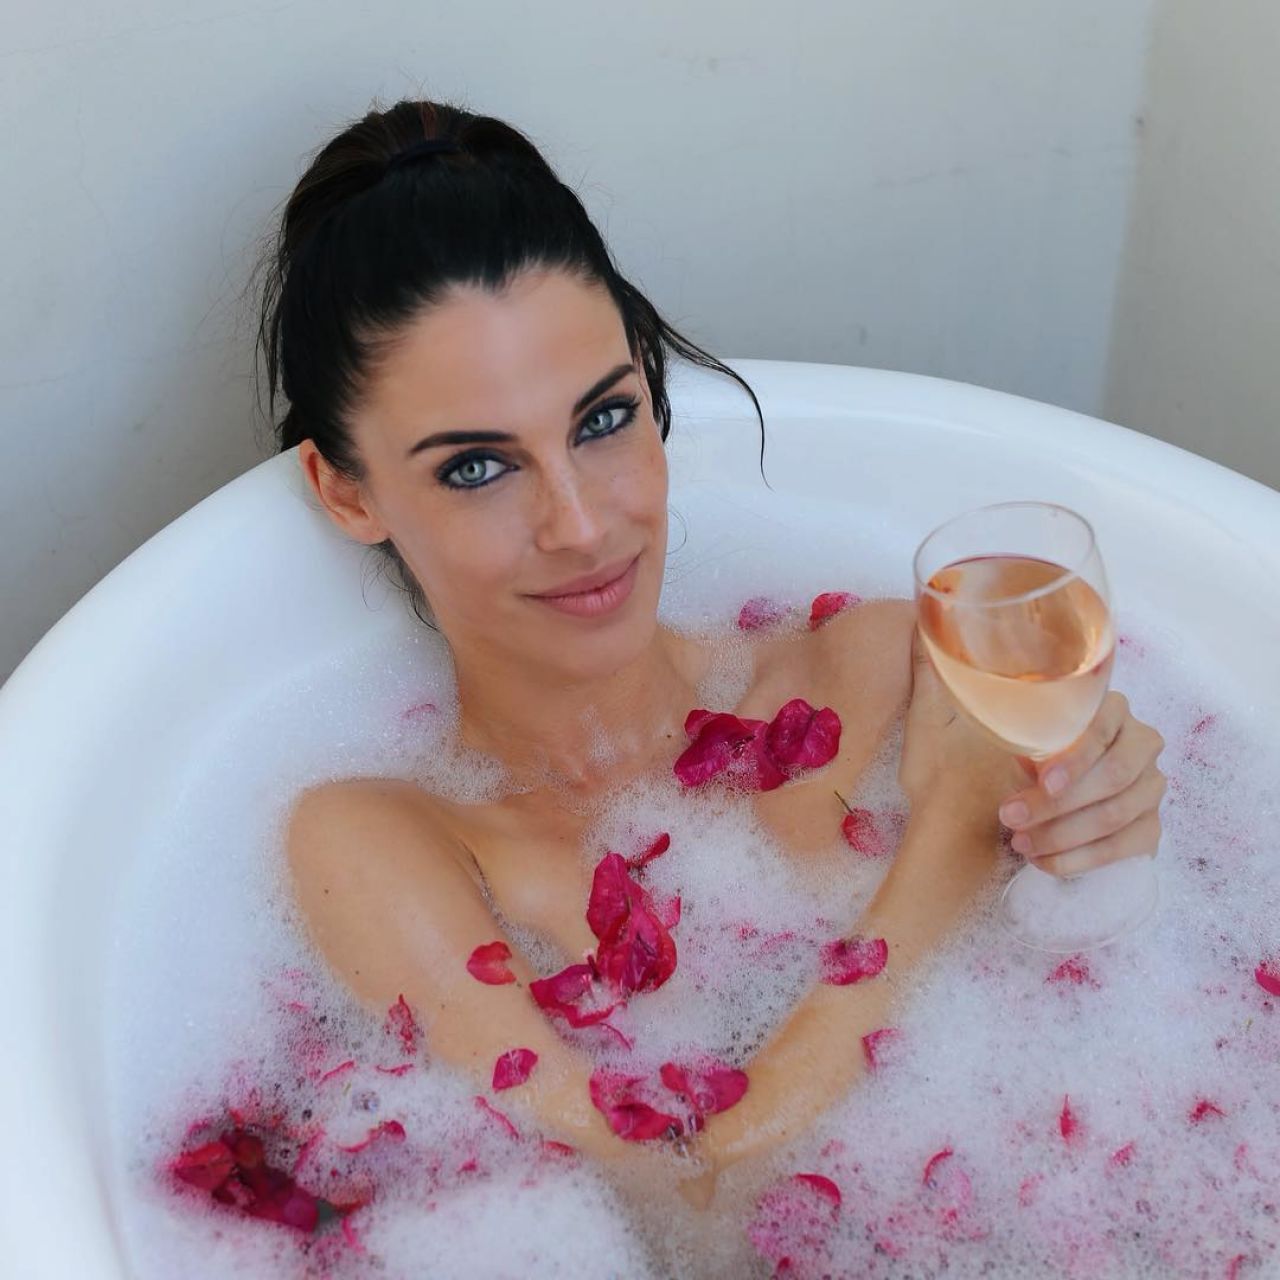 Jessica Lowndes - Personal Pics 03/22/2019.